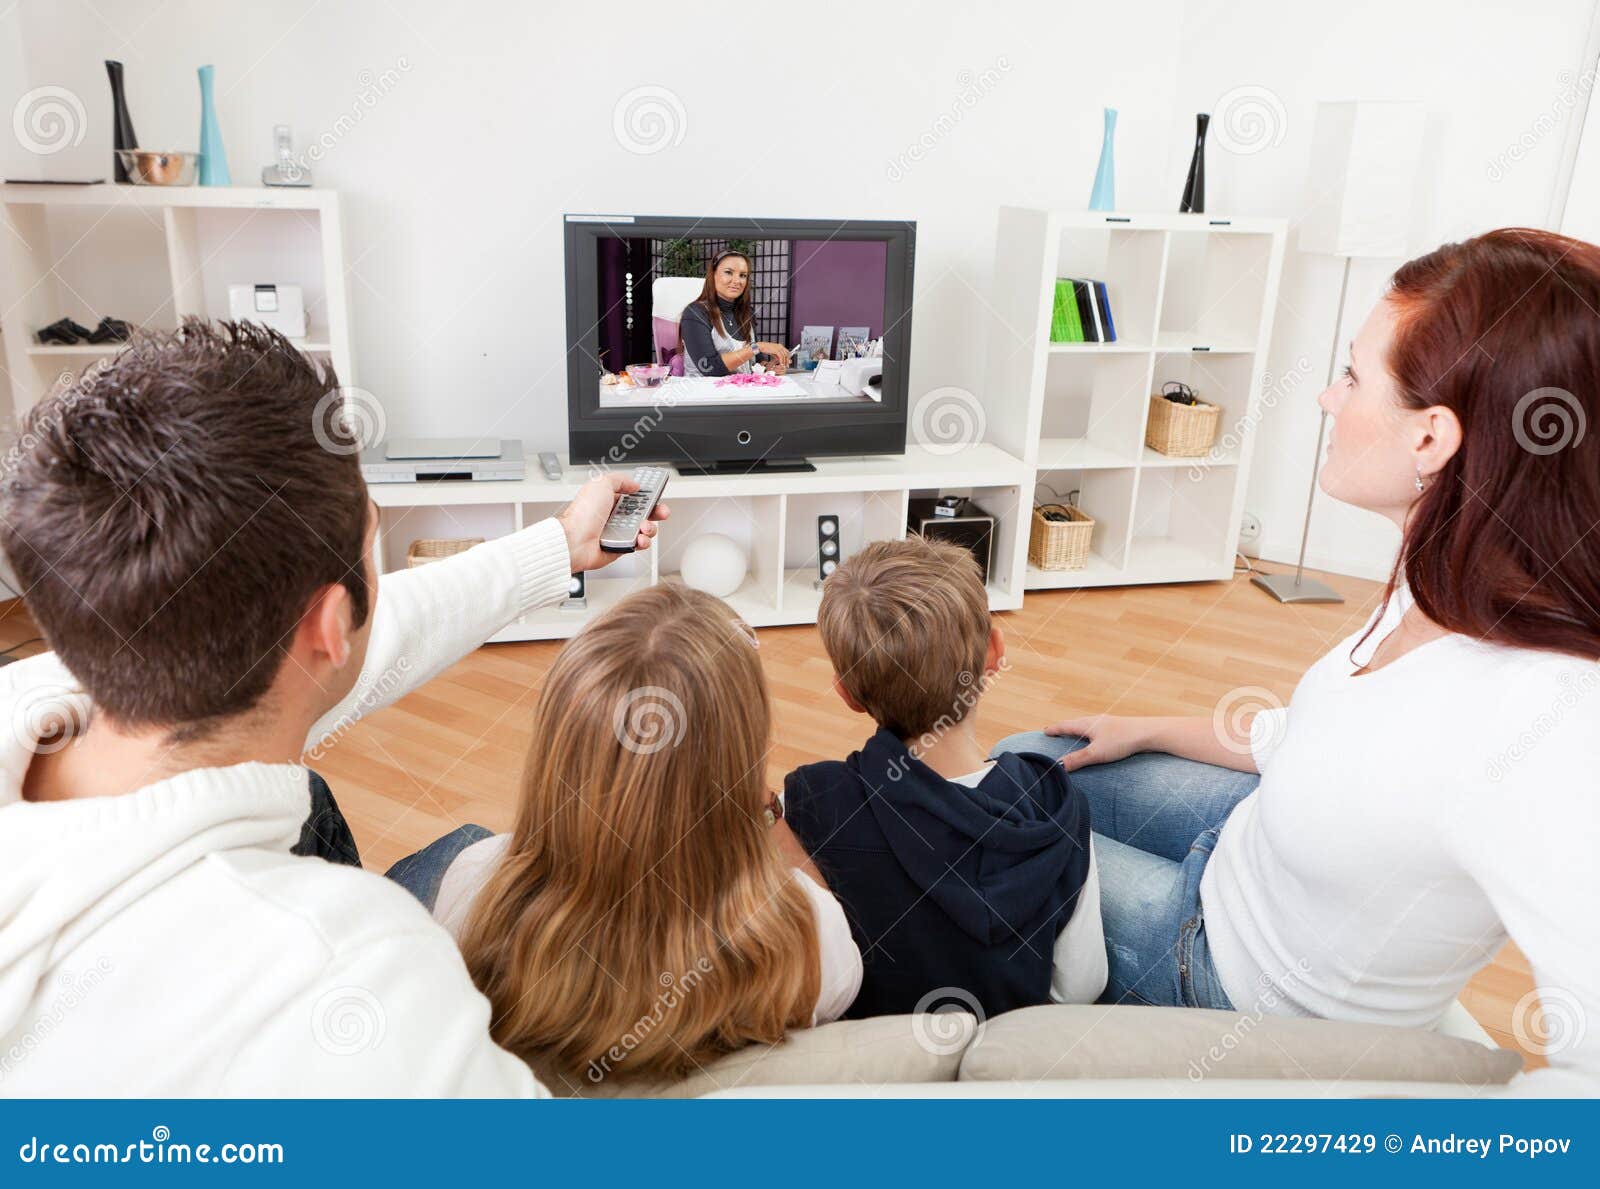 young family watching tv at home